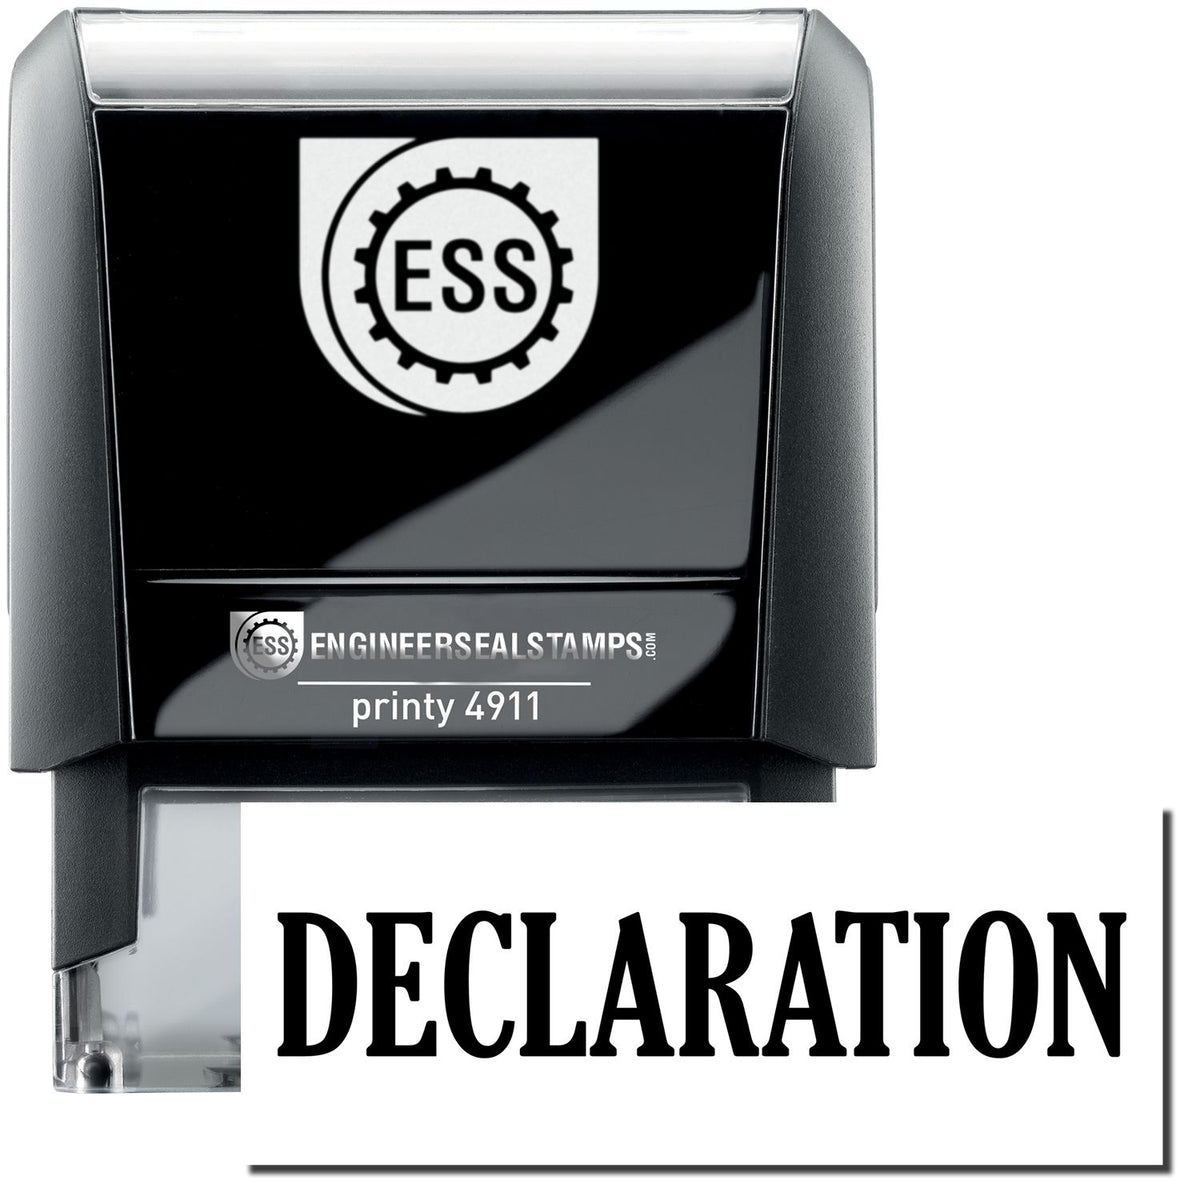 A self-inking stamp with a stamped image showing how the text &quot;DECLARATION&quot; is displayed after stamping.